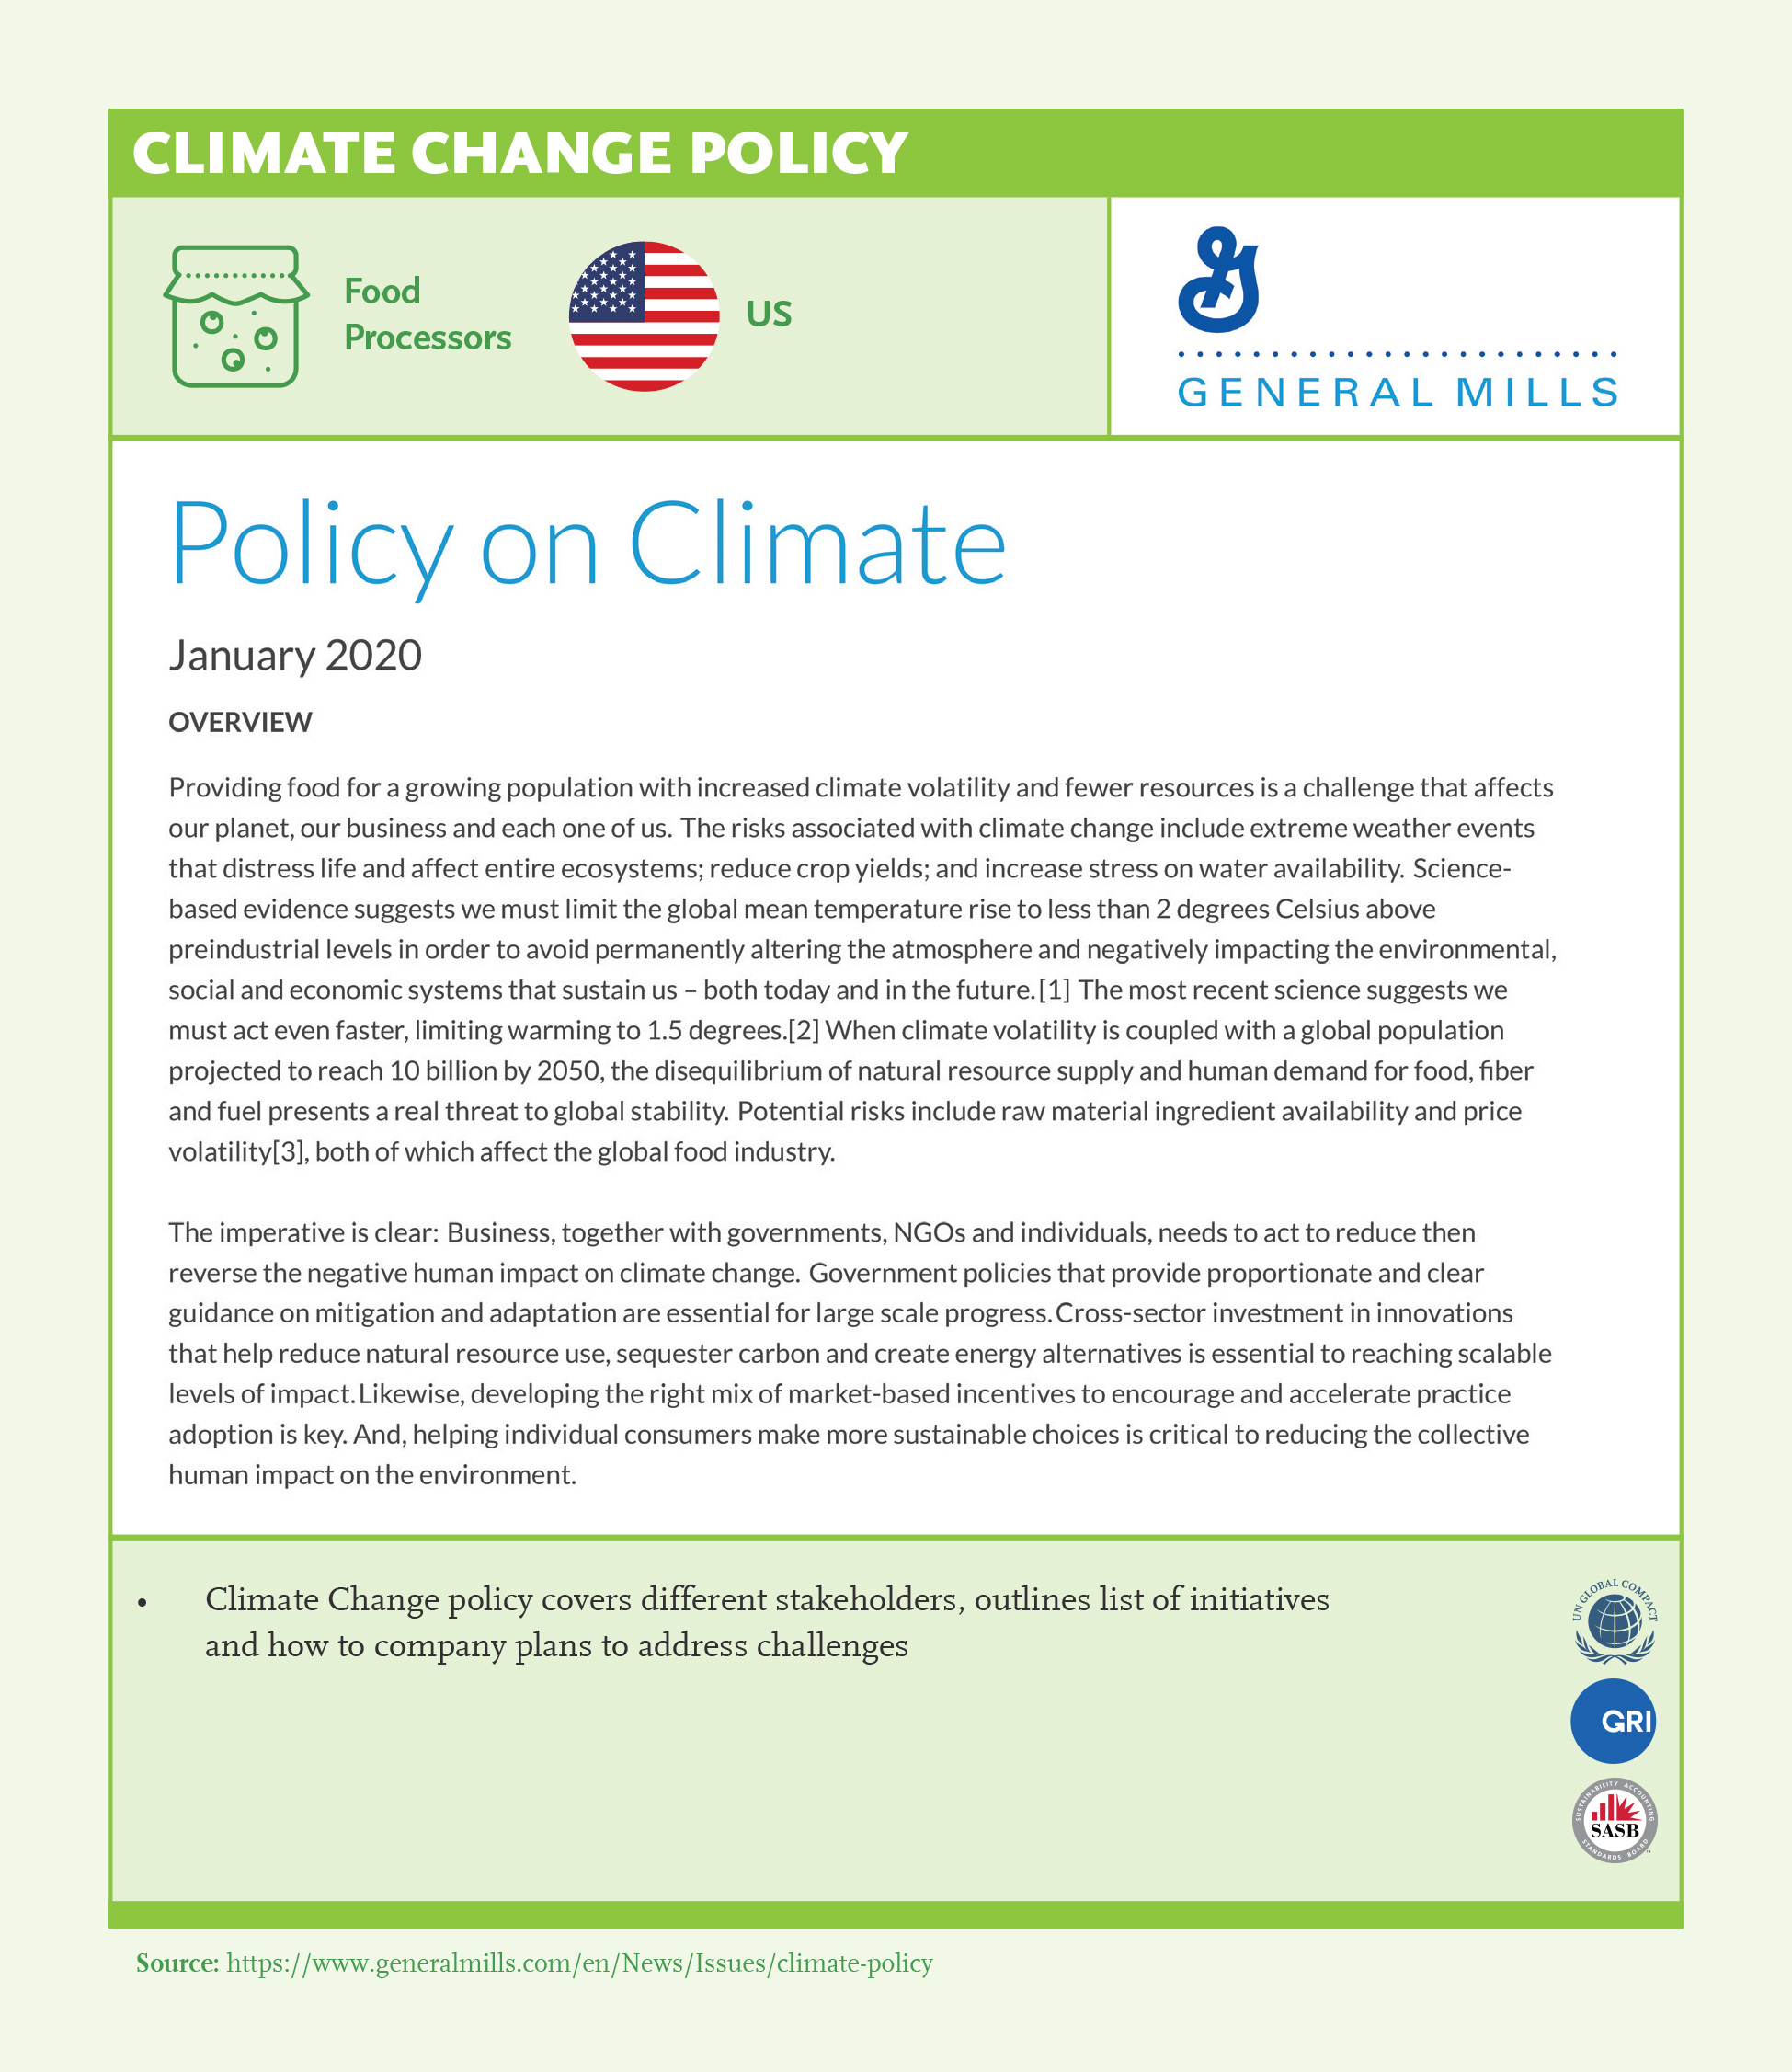 Climate Change Policy: General Mills